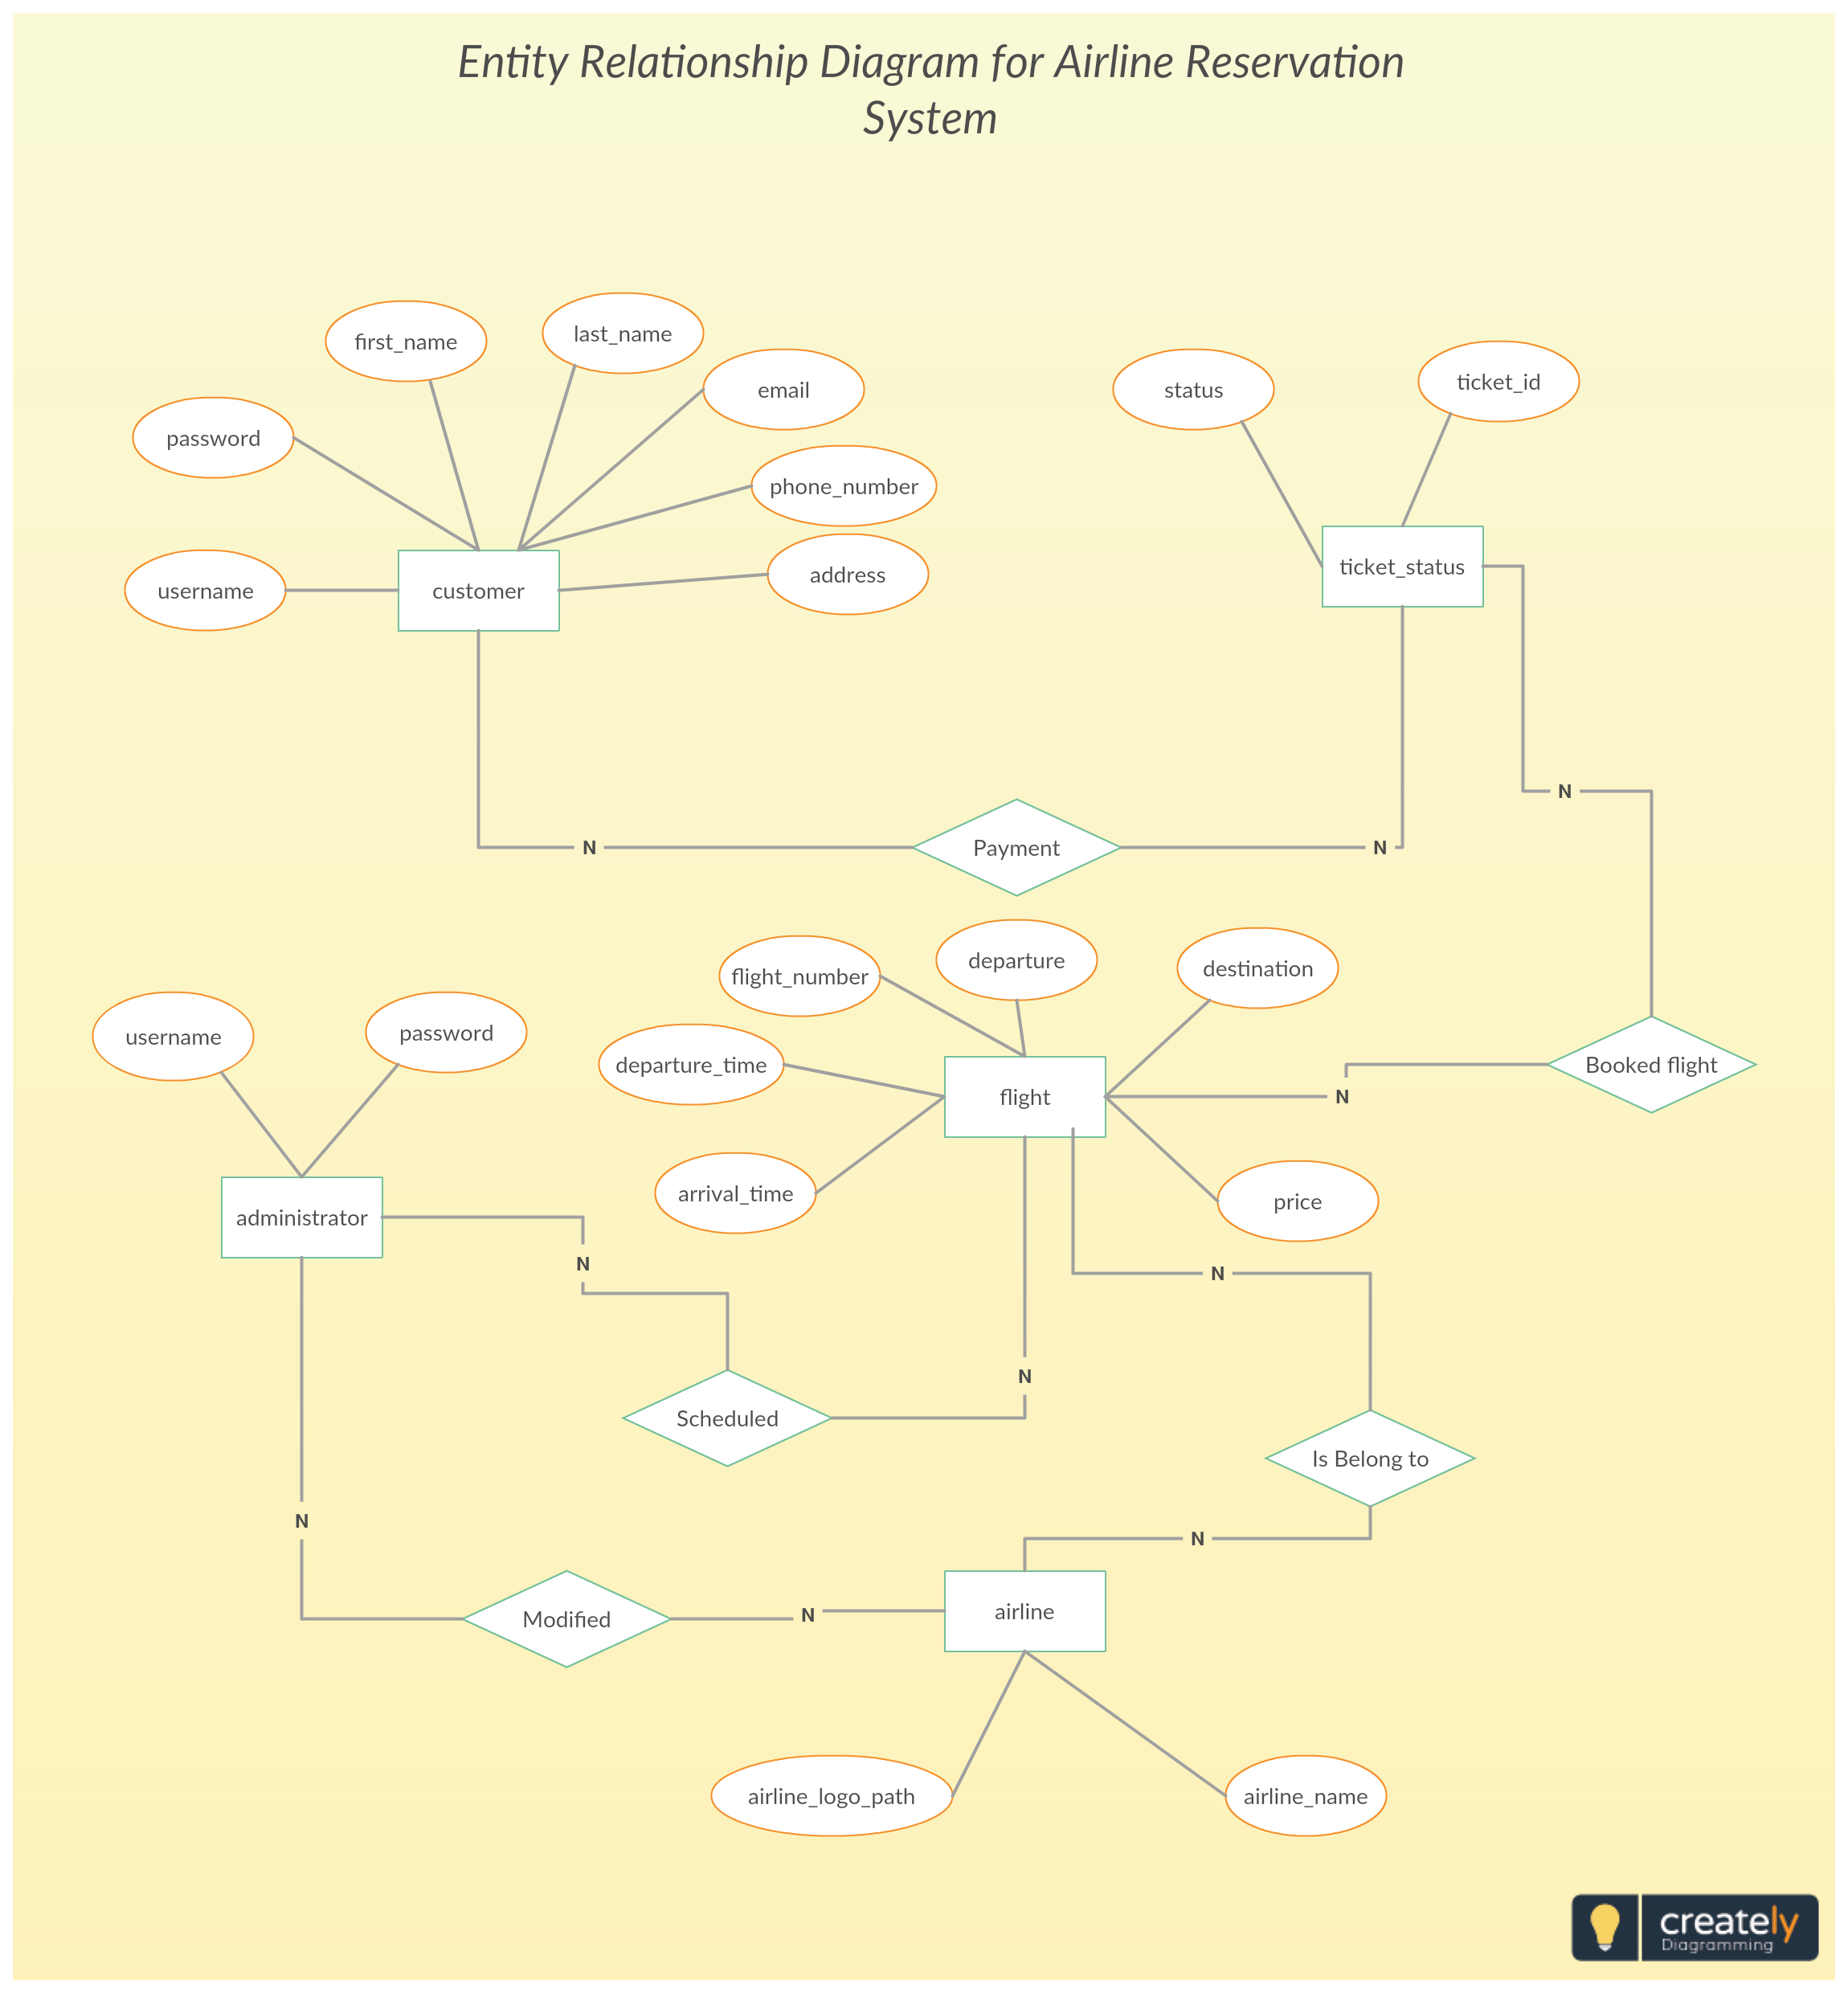 Entity Relationship Diagram For Airline Reservation System To Define with regard to Er Diagram Examples For Airline Reservation System